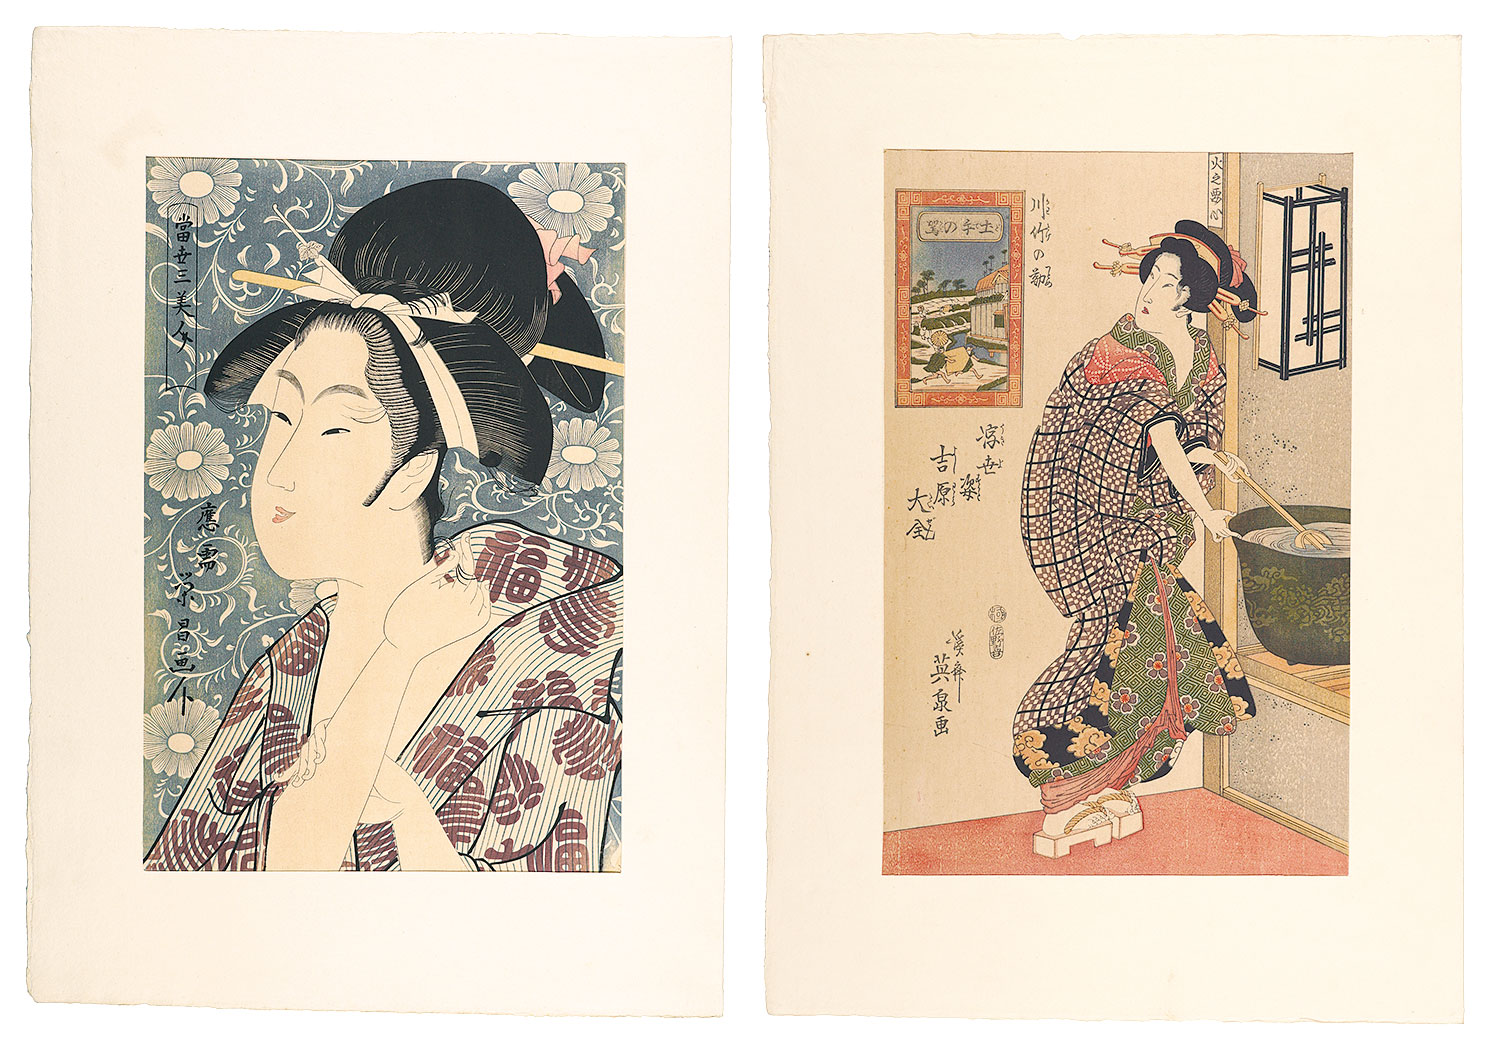 Eisen, Eisho “A Night Scene of the Tea-house  / A Beauty of Summer 【Reproduction】”／